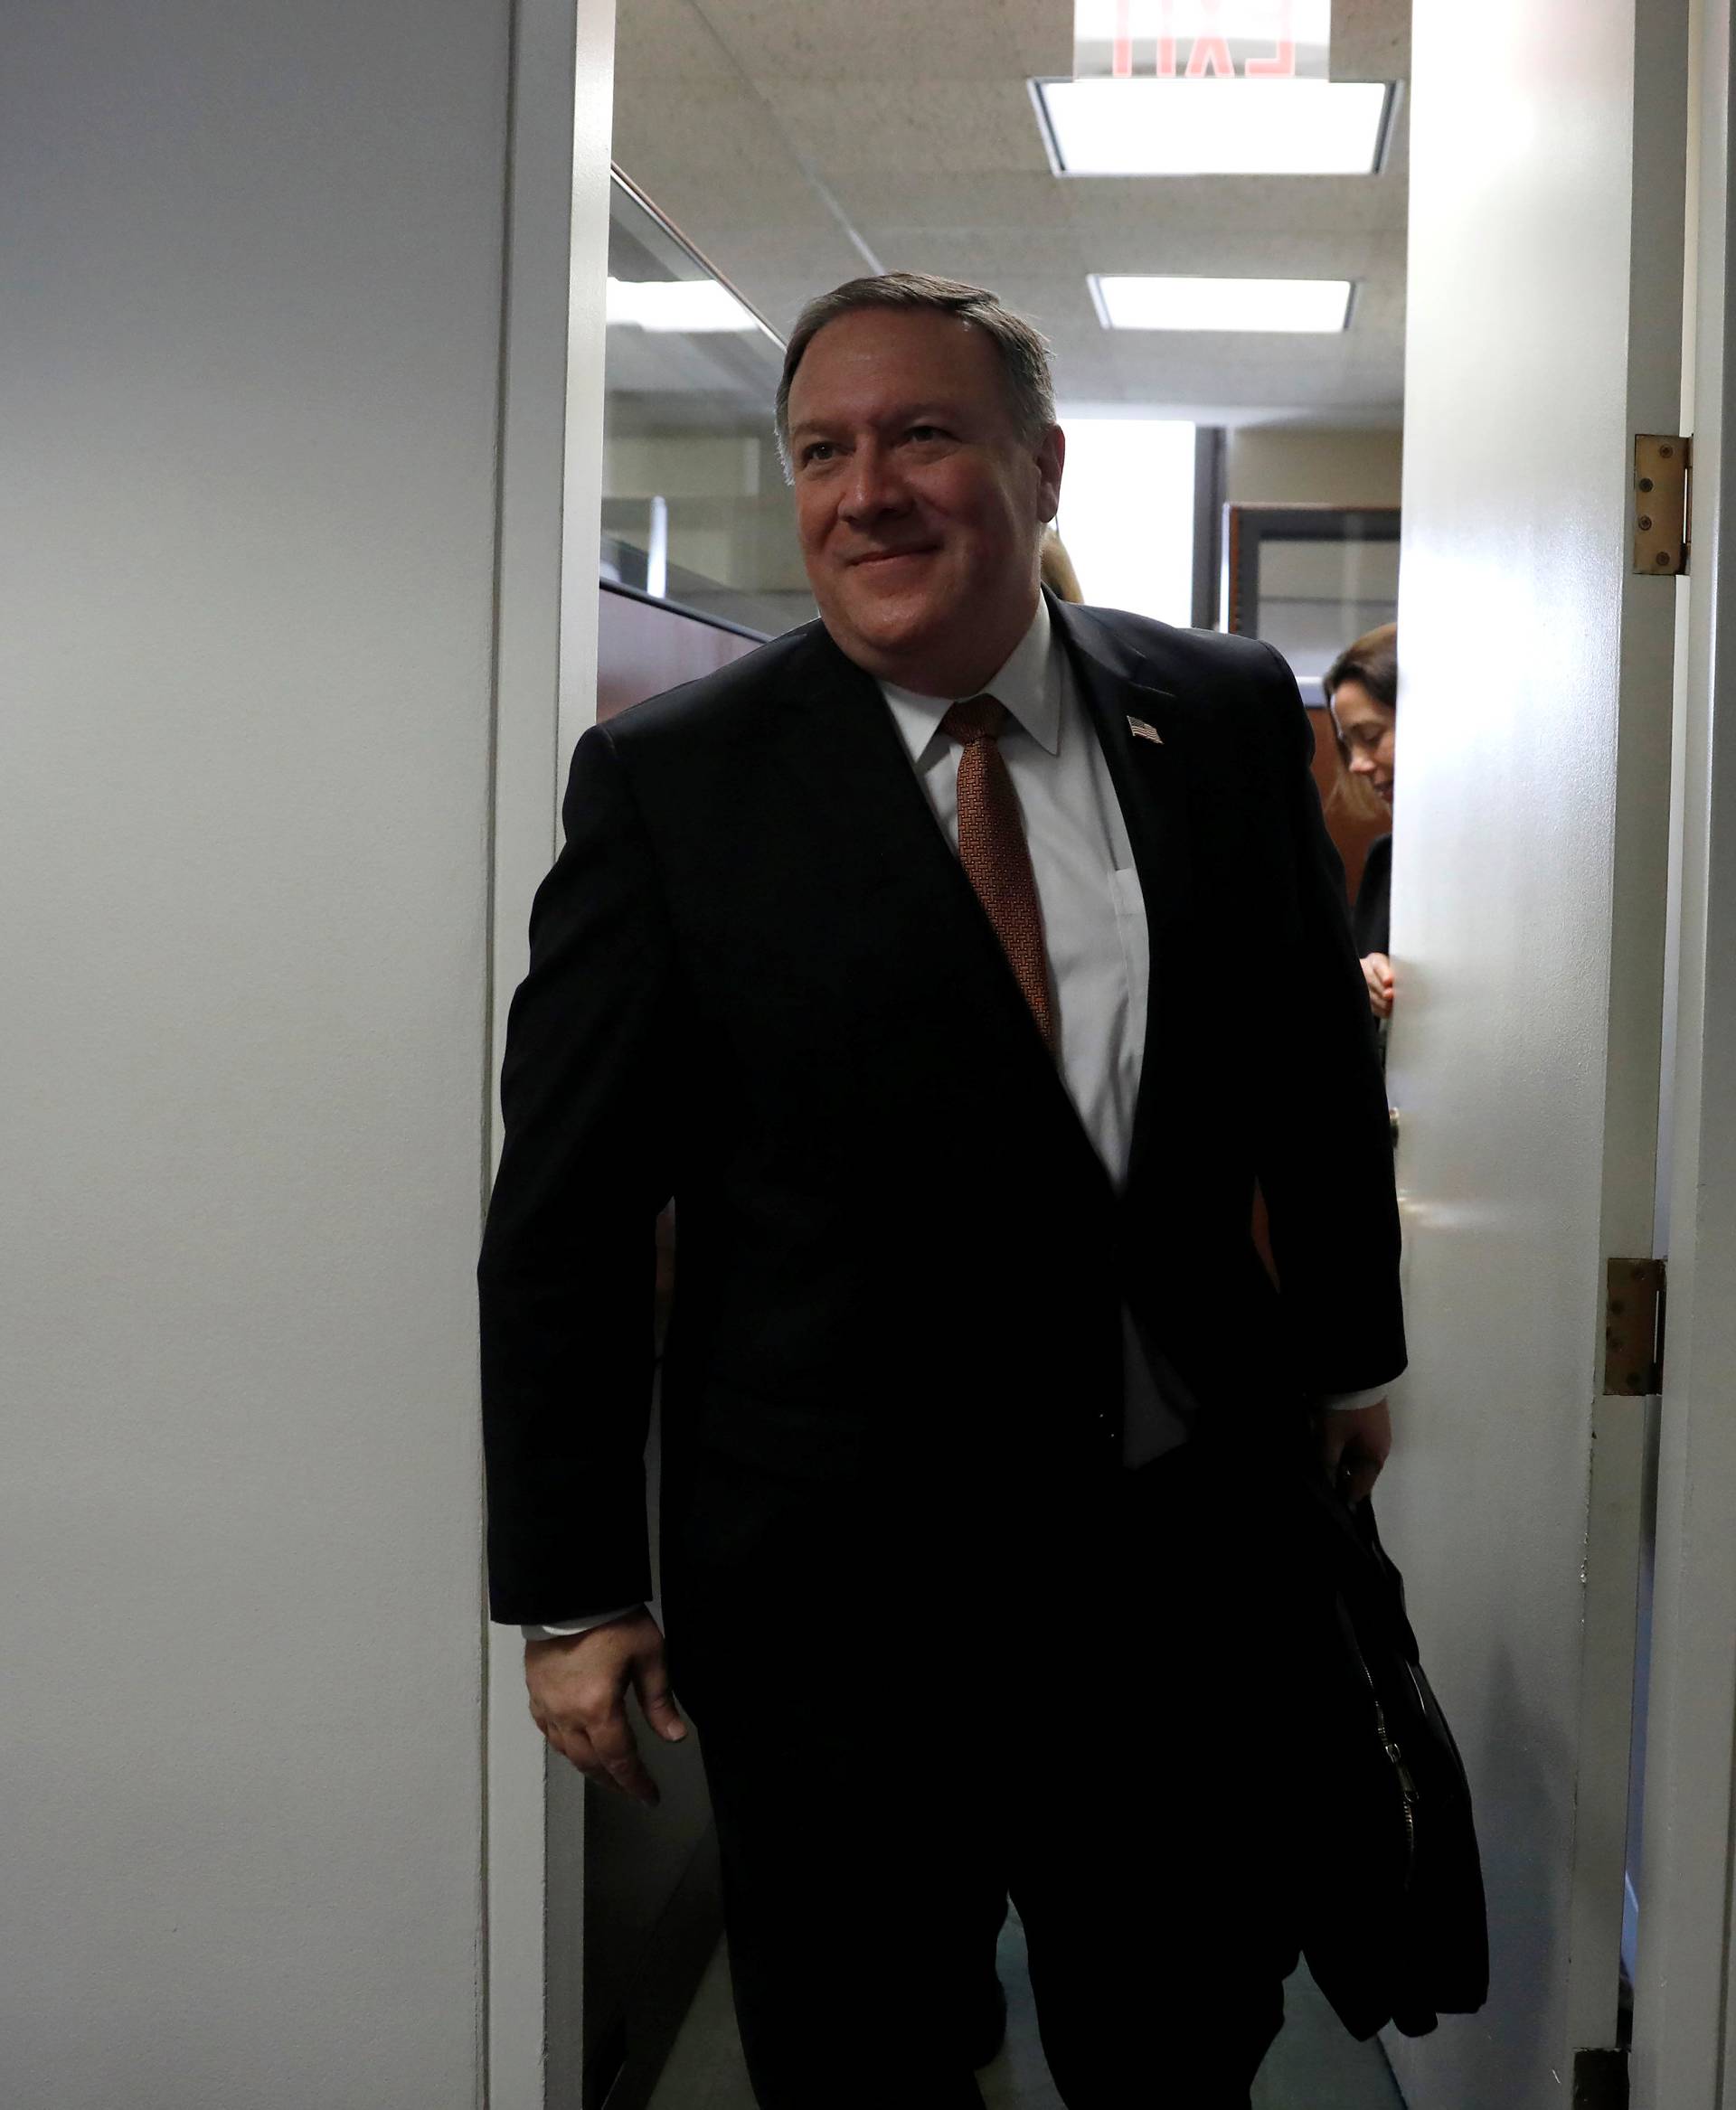 CIA Director Mike Pompeo, President Donald Trump's nominee to be Secretary of State, leaves a meeting with Sen. Mark Warner (D-VA) on Capitol Hill in Washington